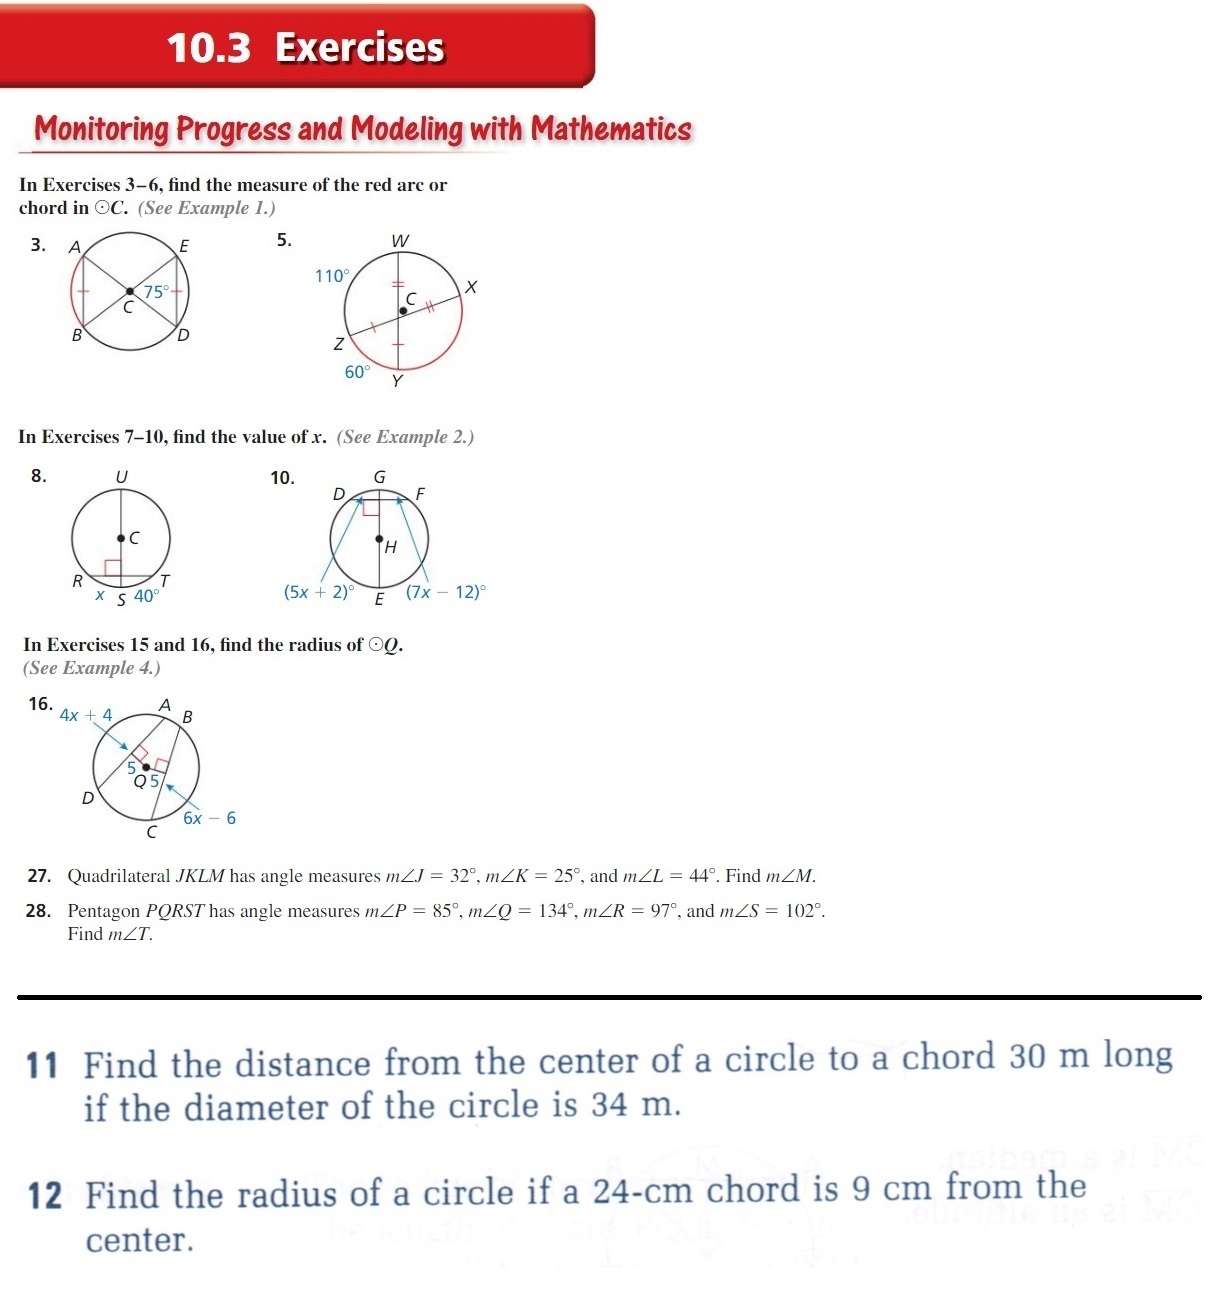 unit-10-homework-10-equations-of-circles-questions-11-12-solved-dote